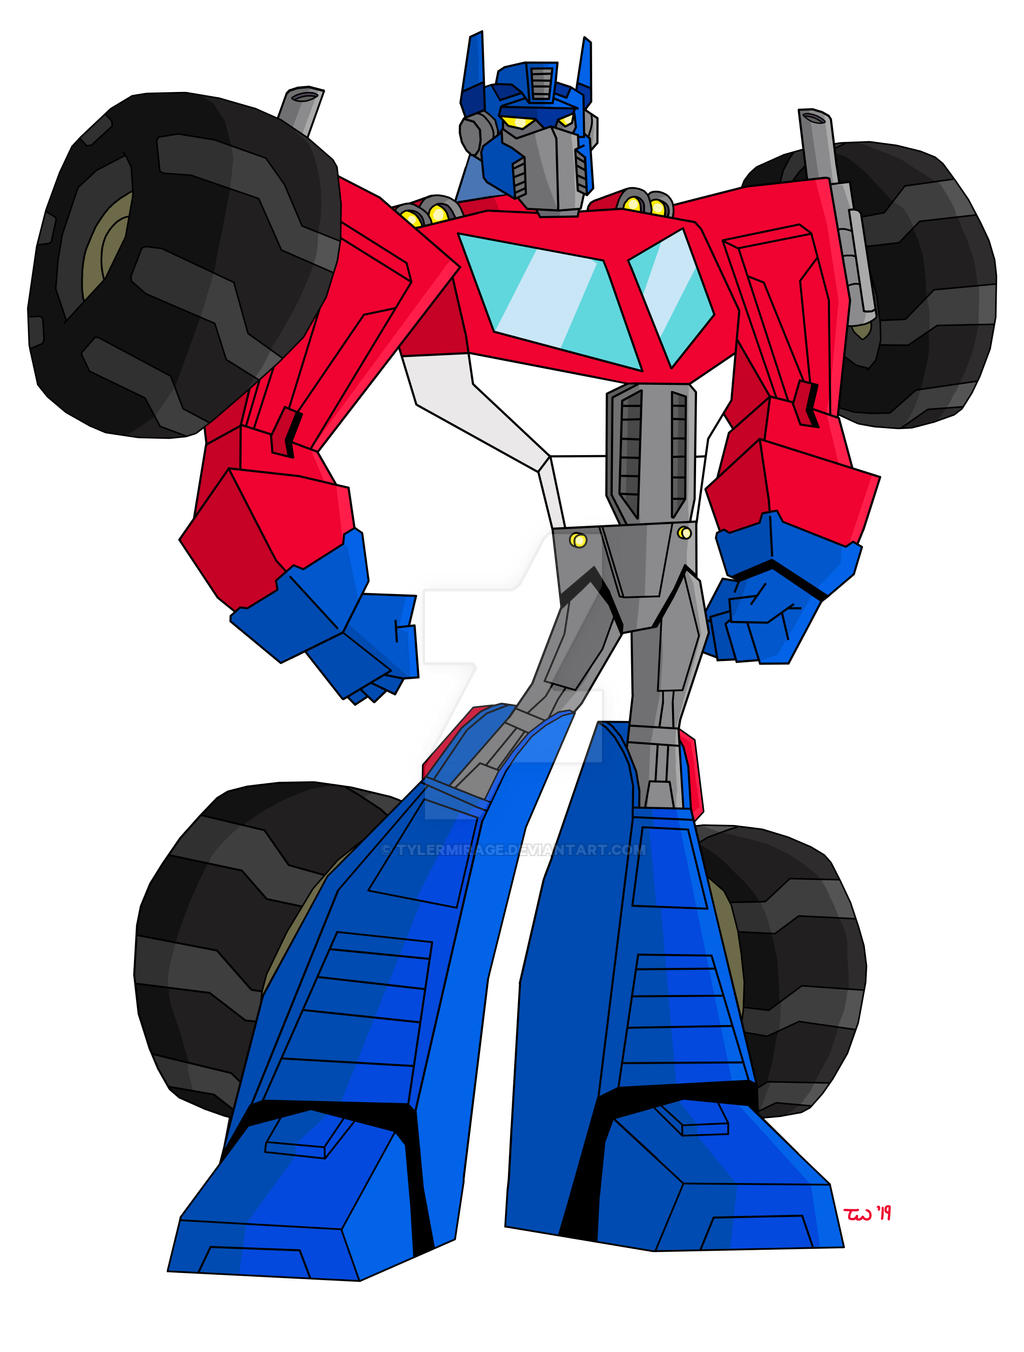 Animated Optimus Prime-Rescue Bots Monster Truck by TylerMirage on ...